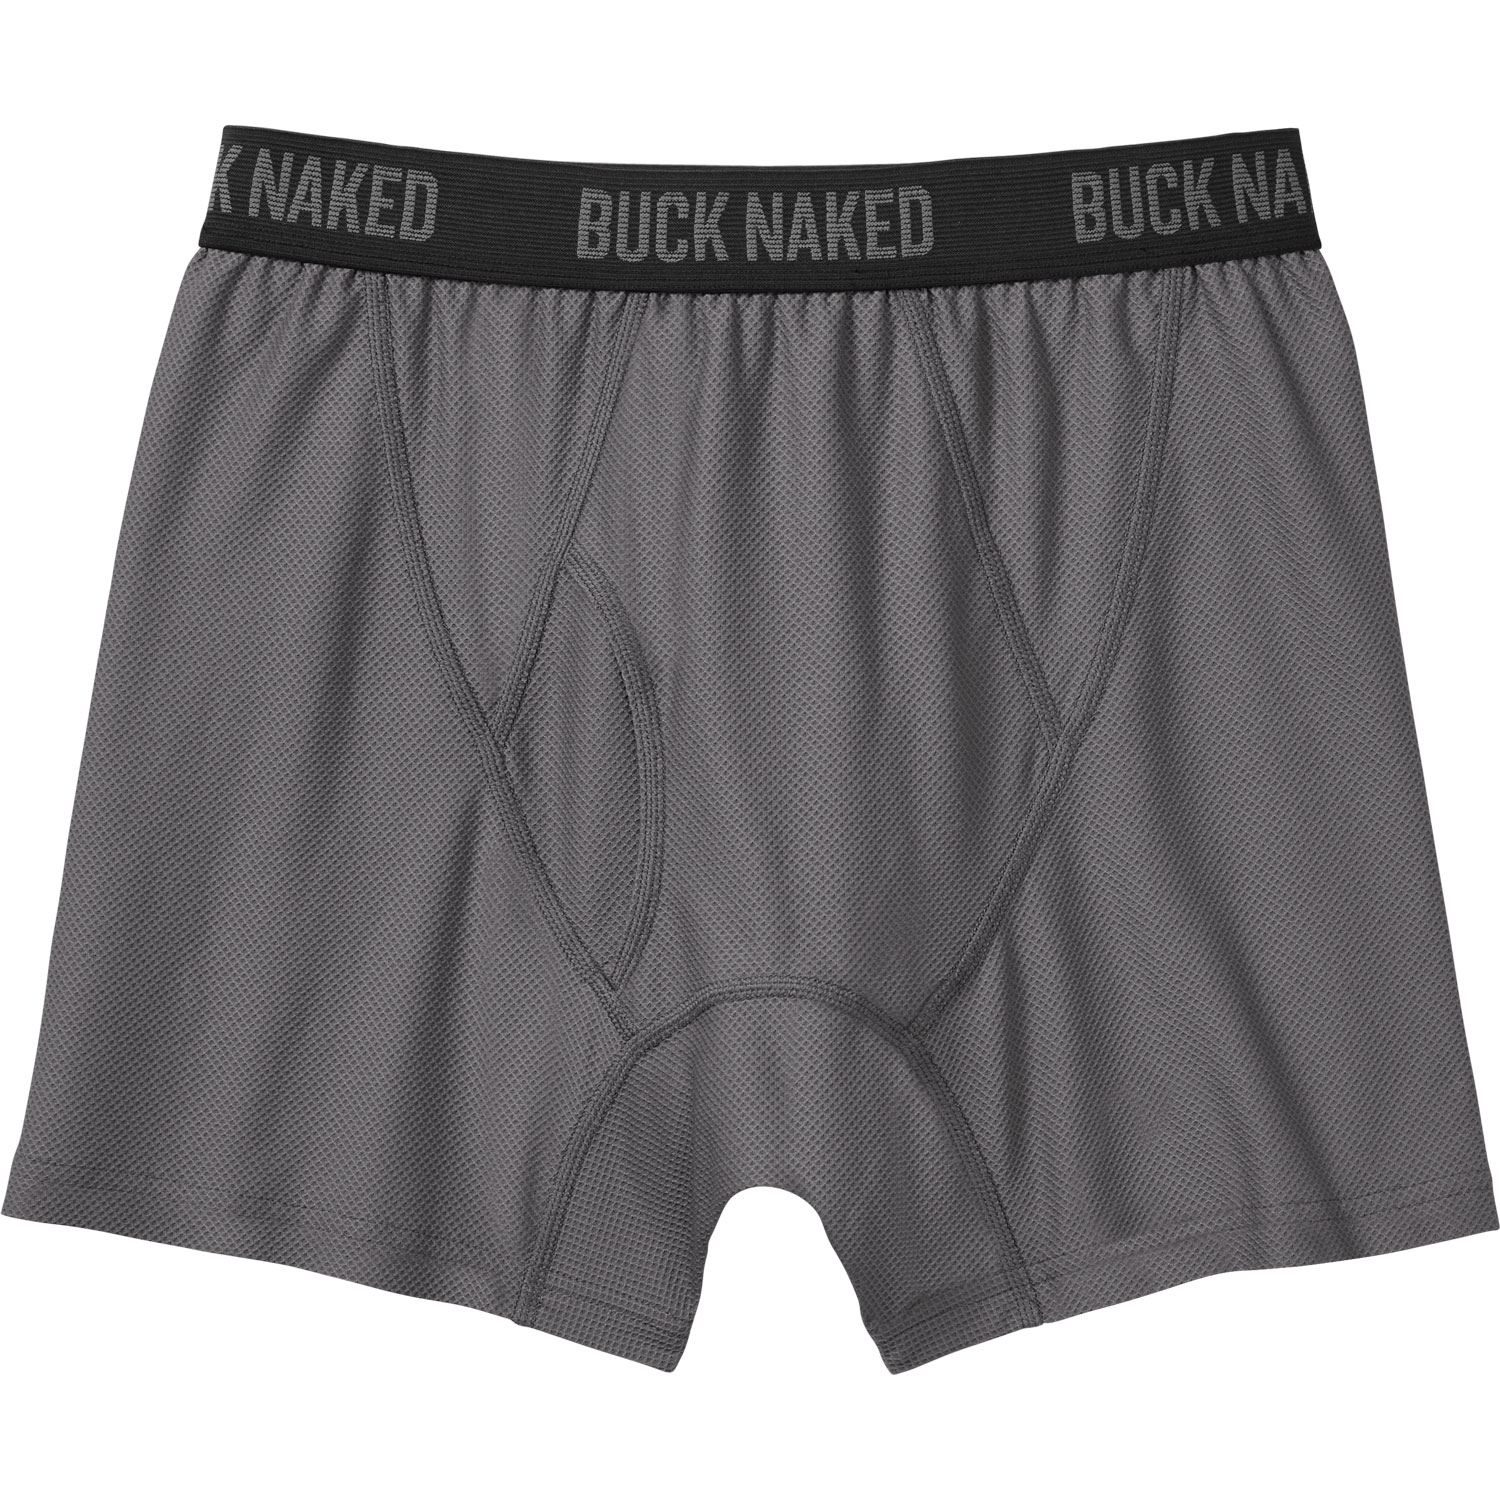 All your favorite Duluth underwear now come with the option for